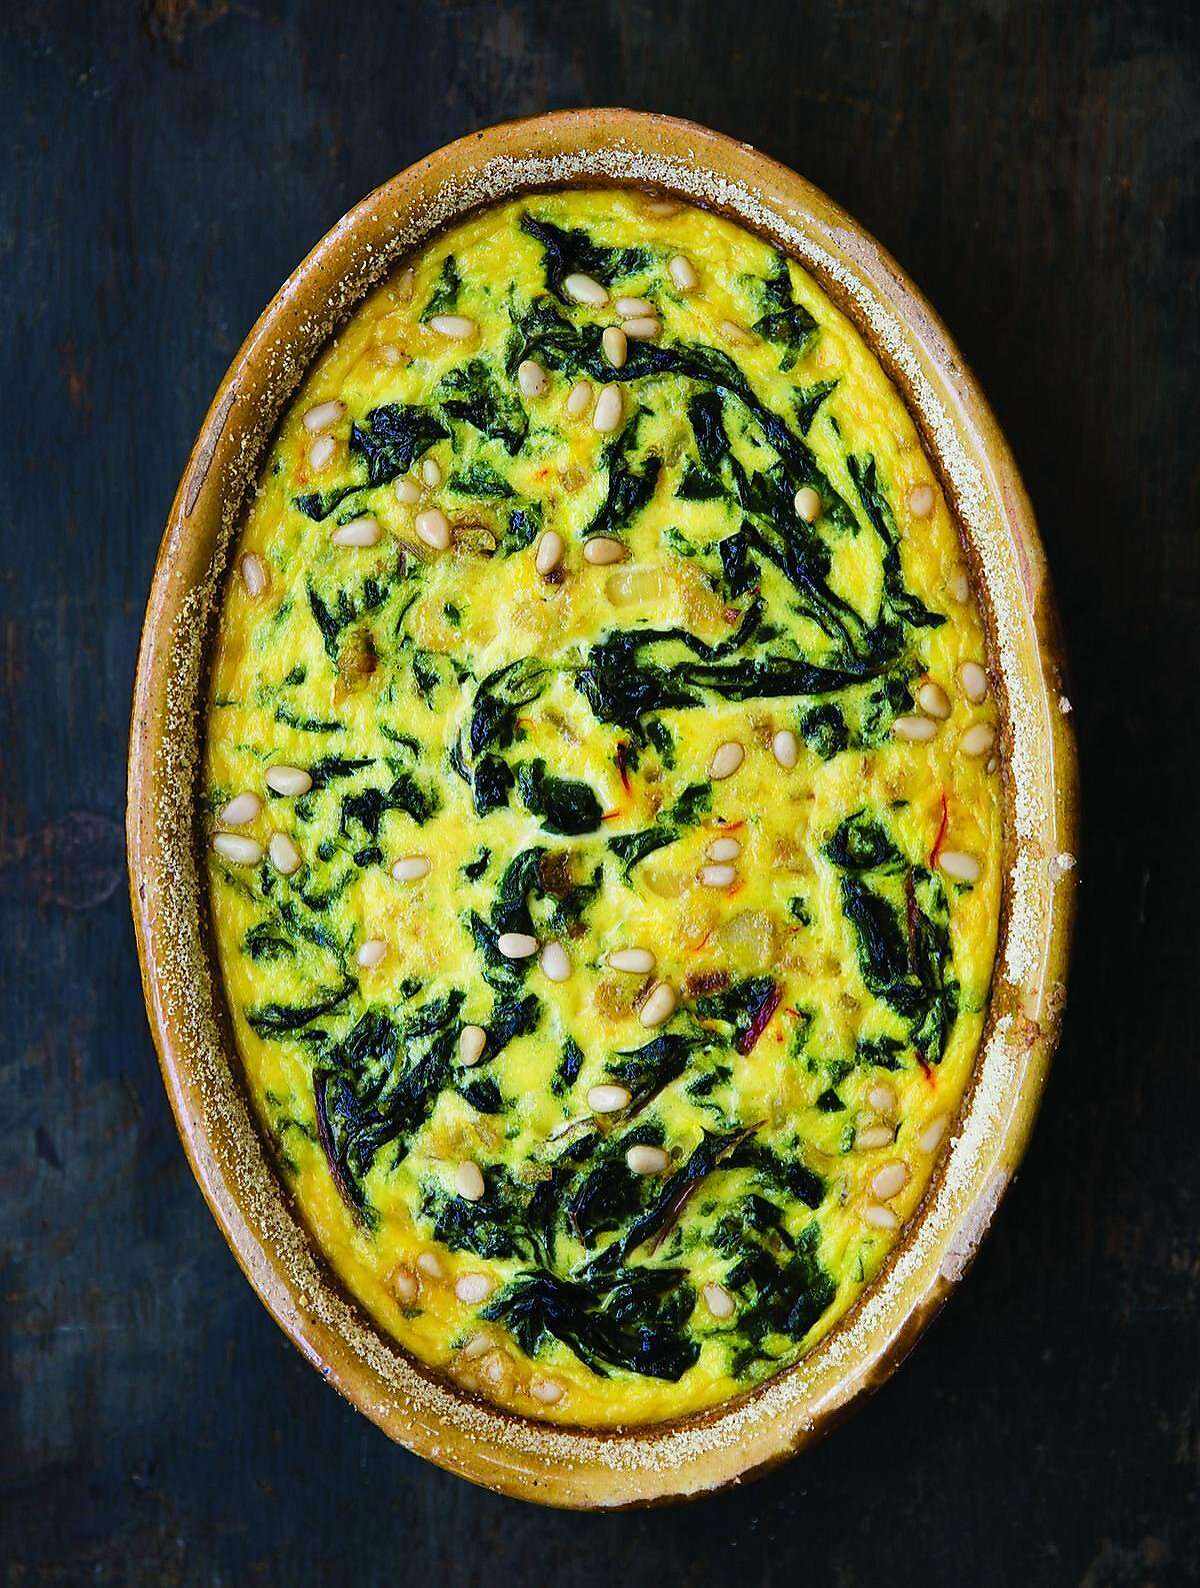 Chard & Saffron Flan in an Almond Crust from Deborah Madison's new cookbook, "In My Kitchen: A Collection of New and Favorite Vegetarian Recipes" (Ten Speed Press; 296 pages; $32.50)